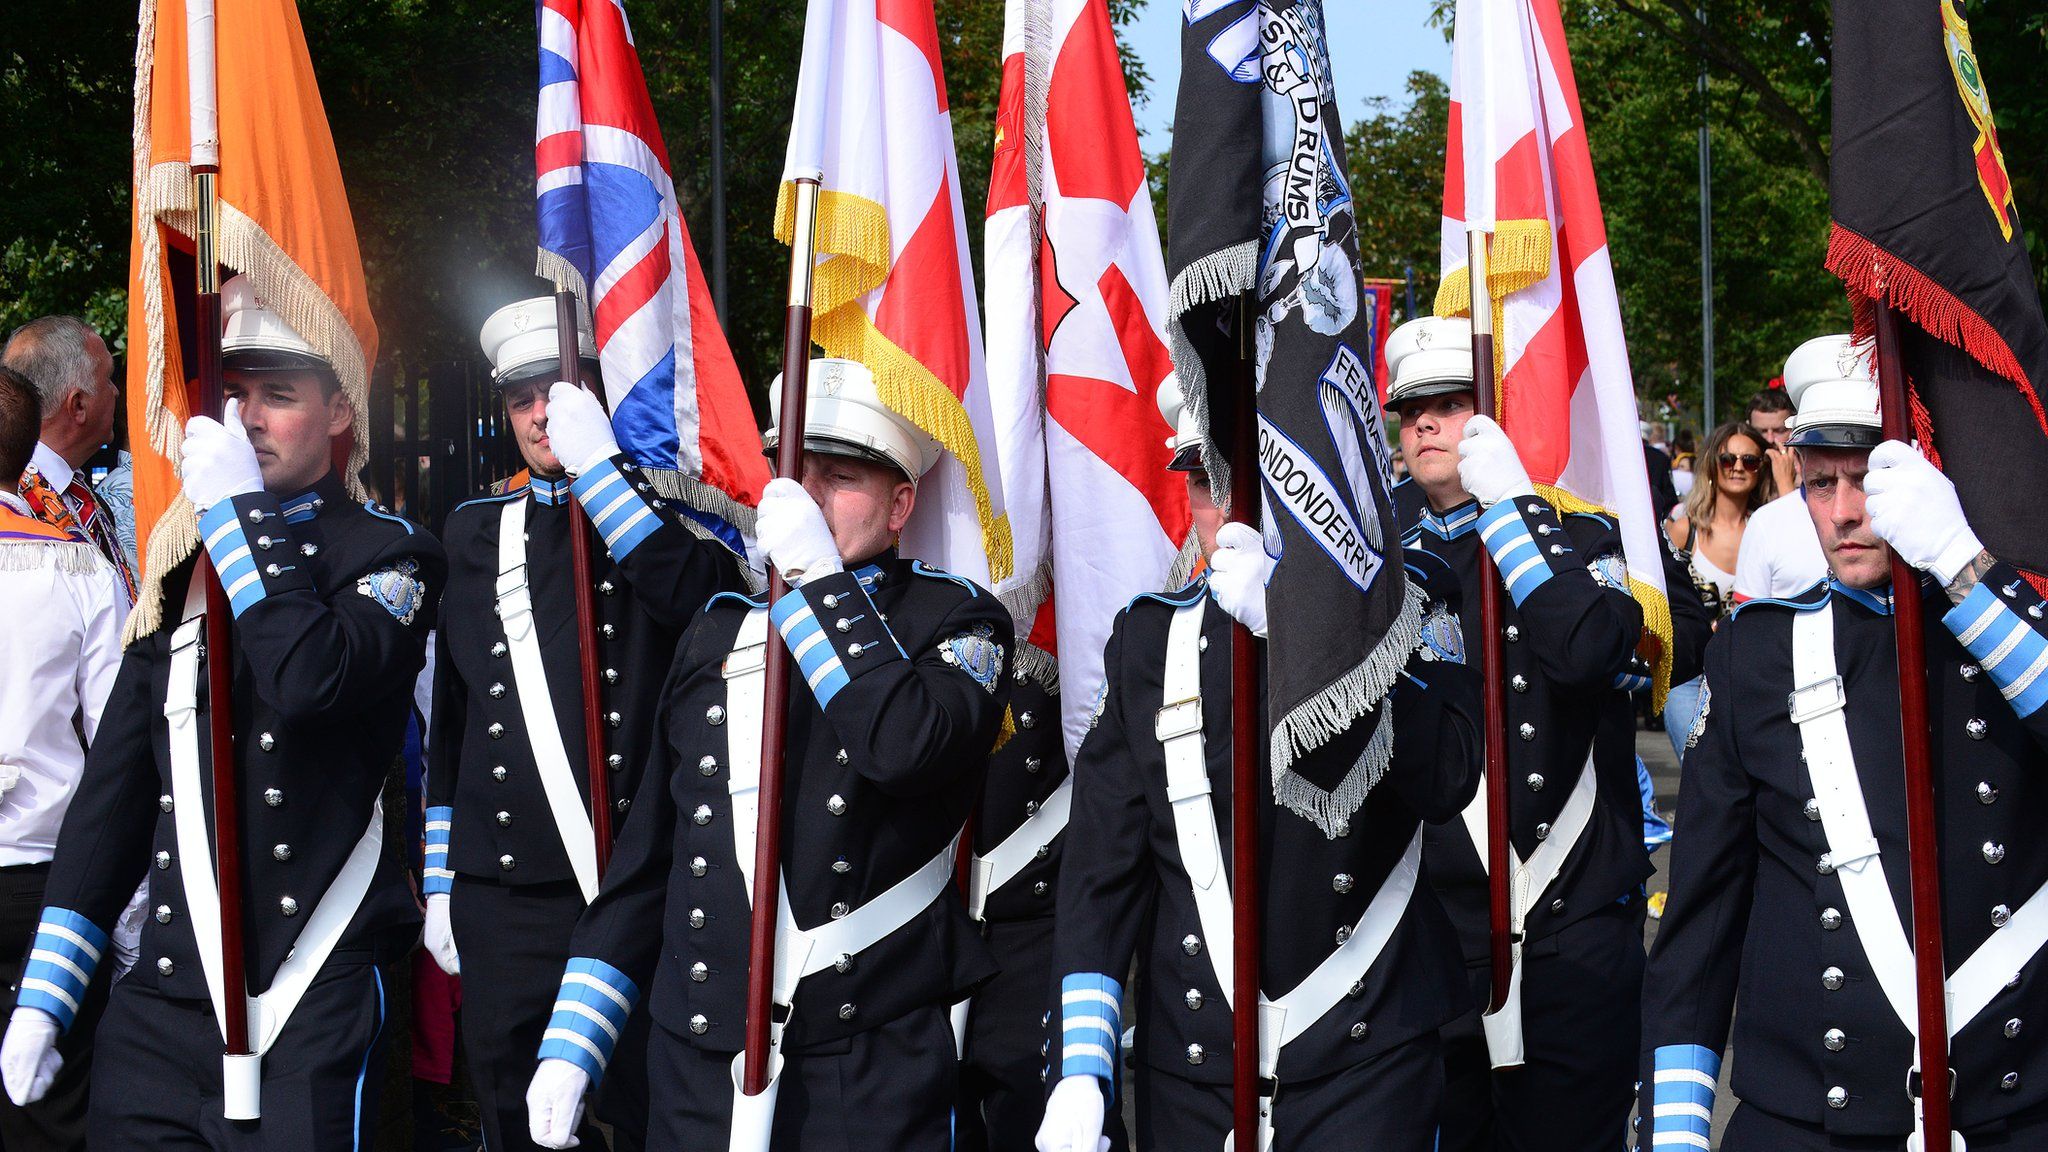 Flag bearers marching at the Twelfth parade in Newtownards